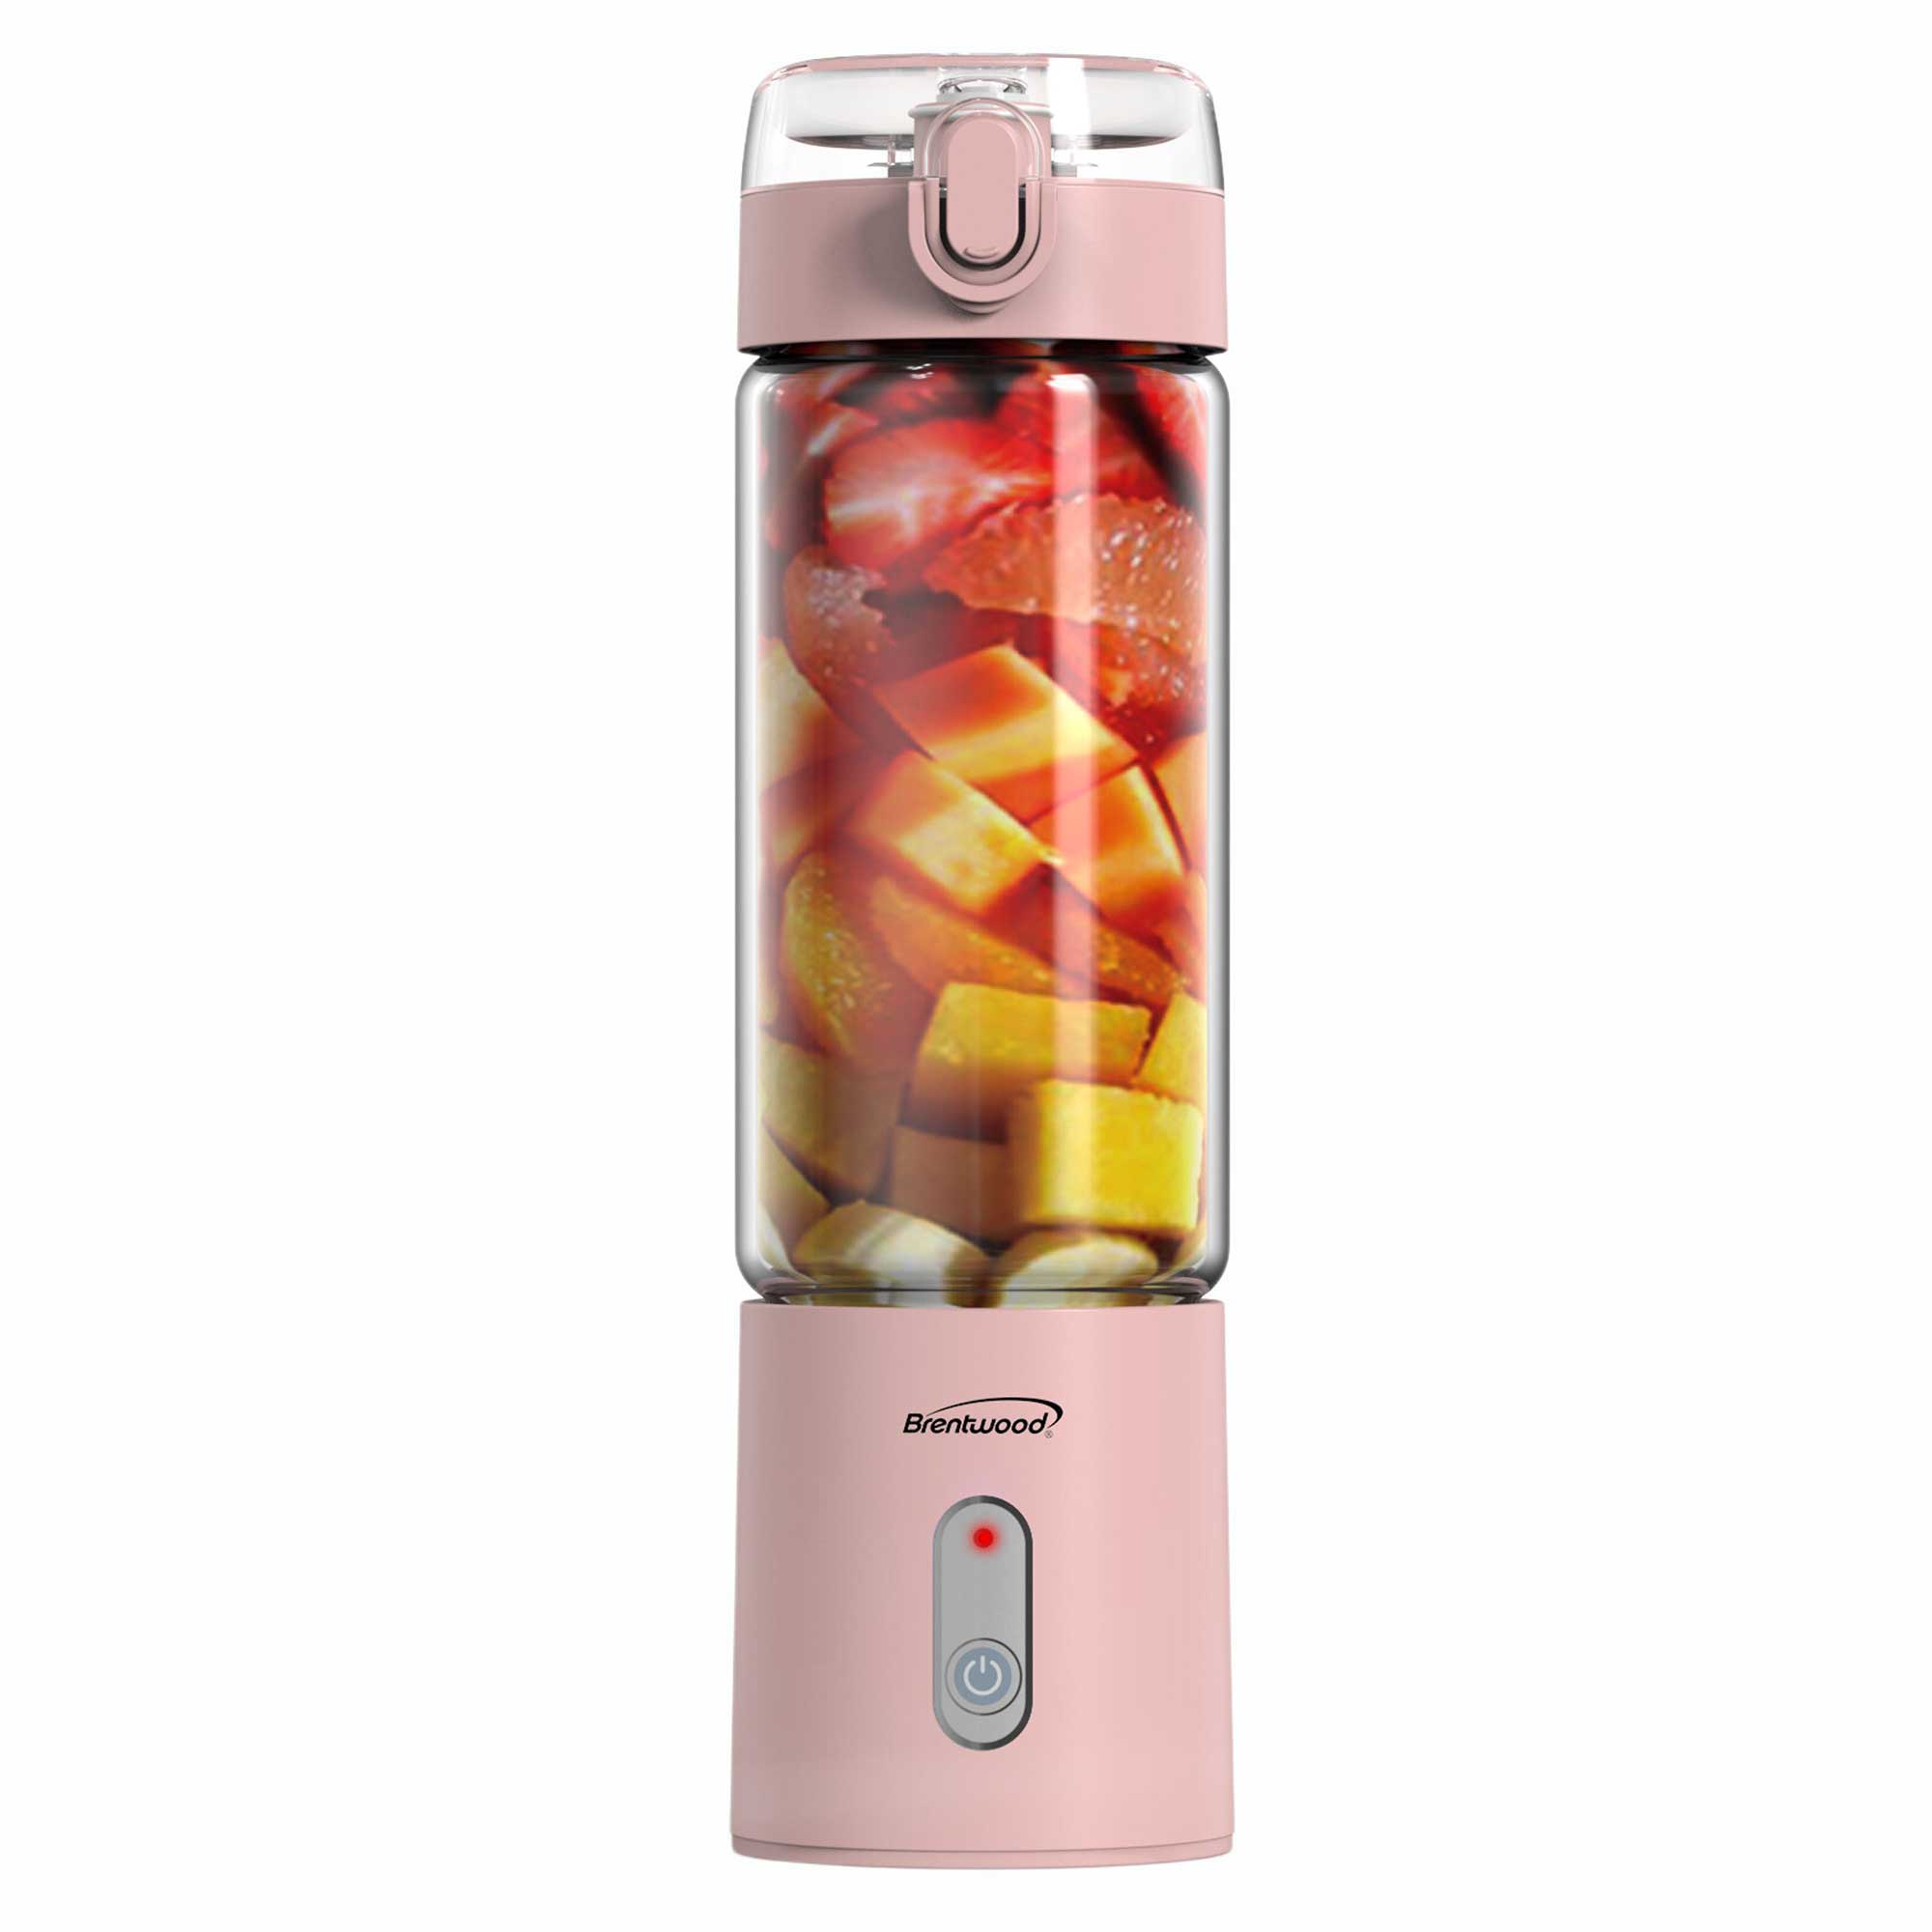 Brentwood RJB-100PK 17oz Portable Battery Operated USB Glass Blender, Pink